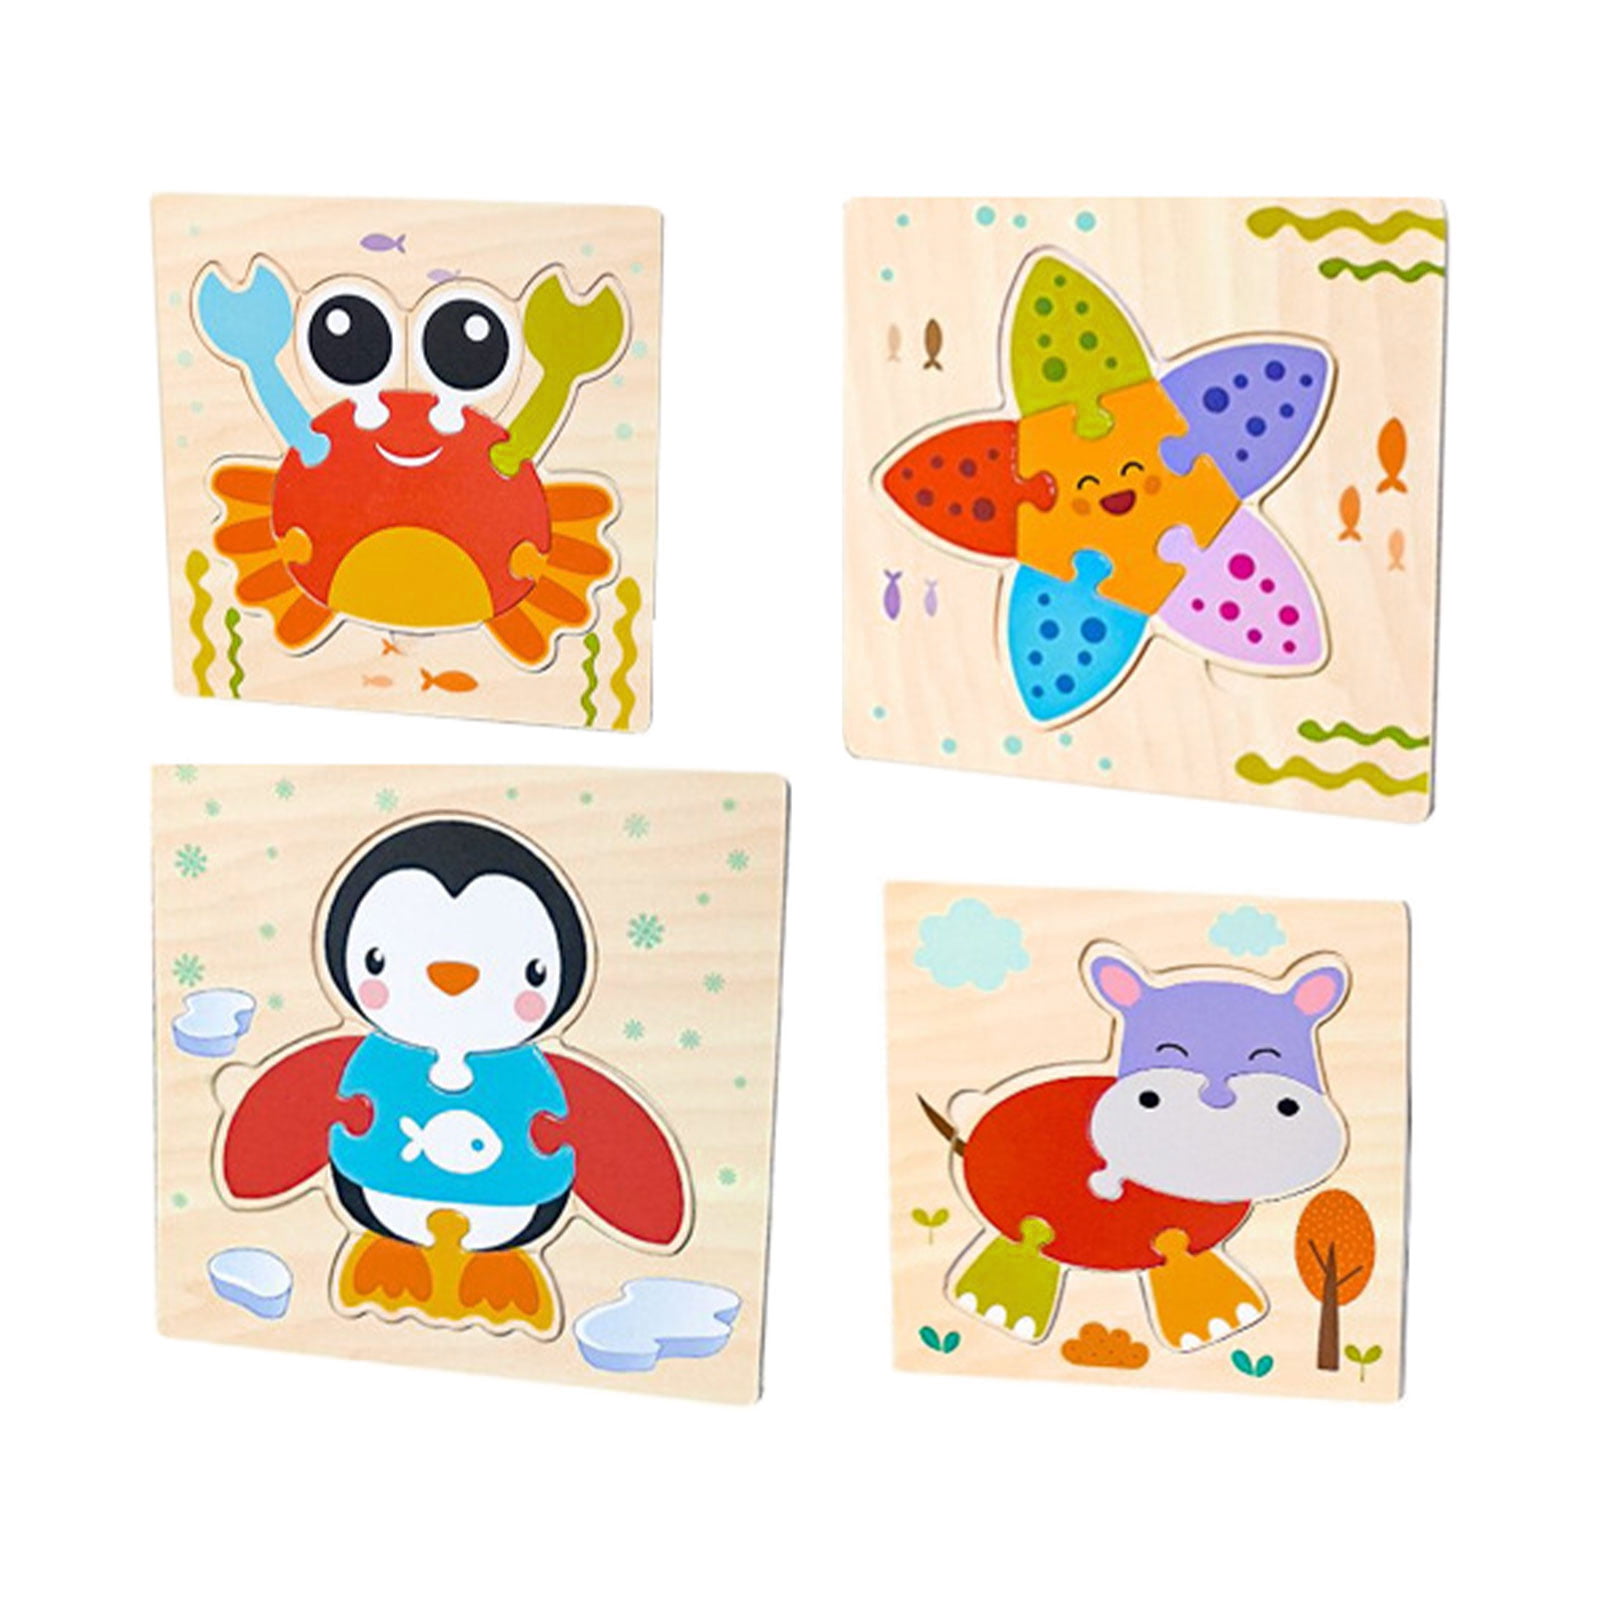 Details about   3D Animal Wooden Matching Jigsaw Toddler Puzzles Learning for Baby Children Kids 